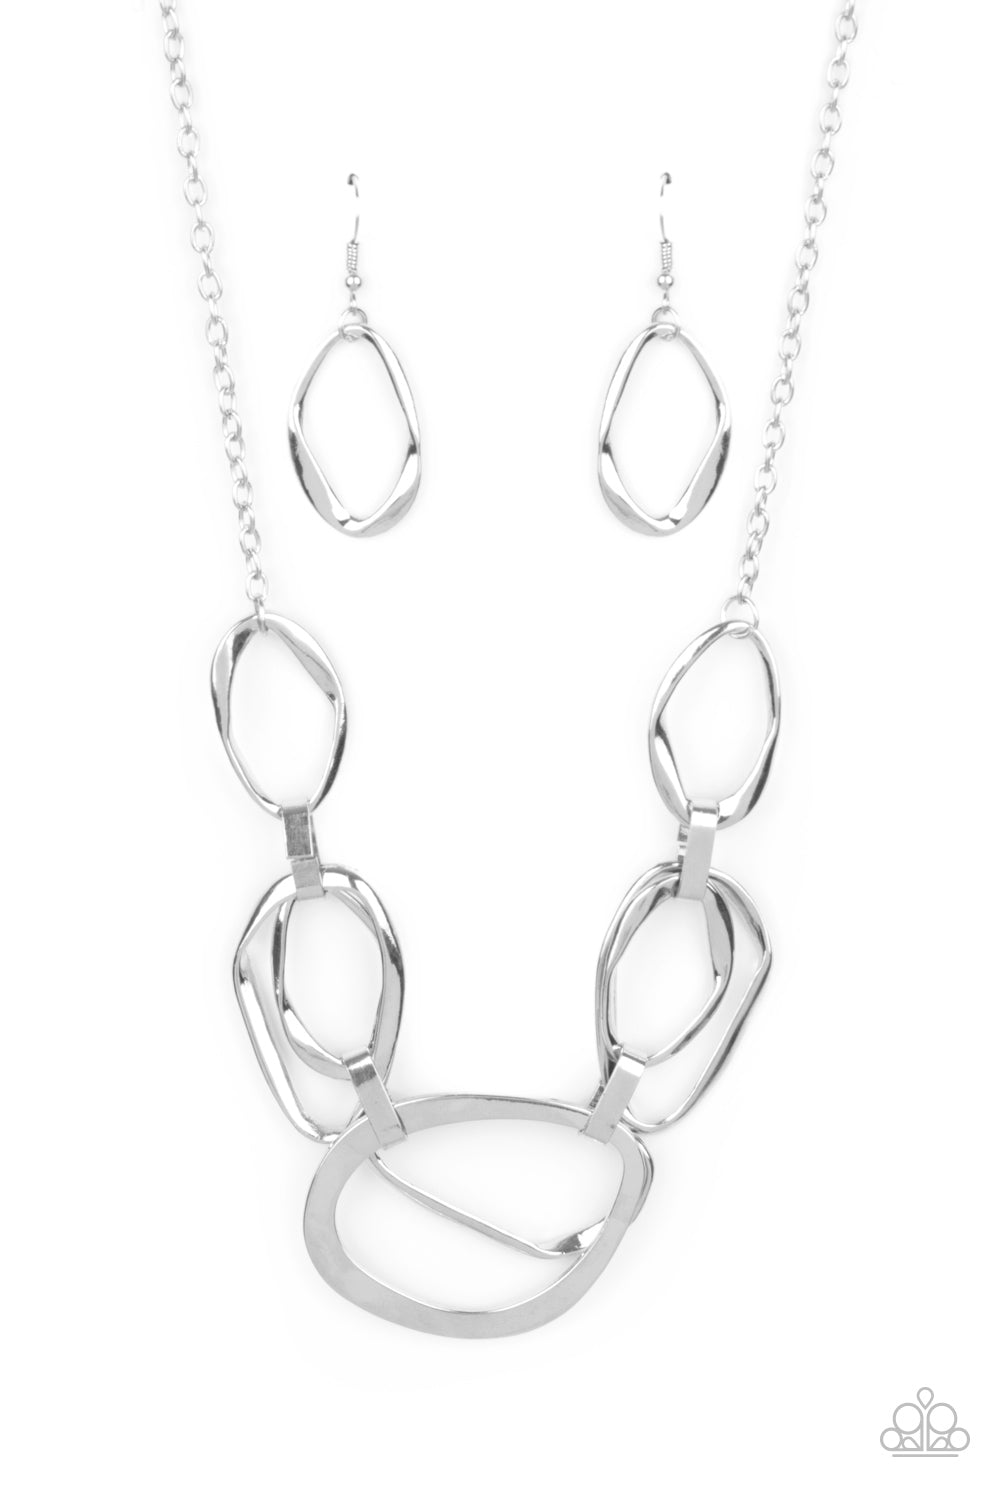 Paparazzi Accessories Prehistoric Heirloom - Silver Necklaces - Lady T Accessories